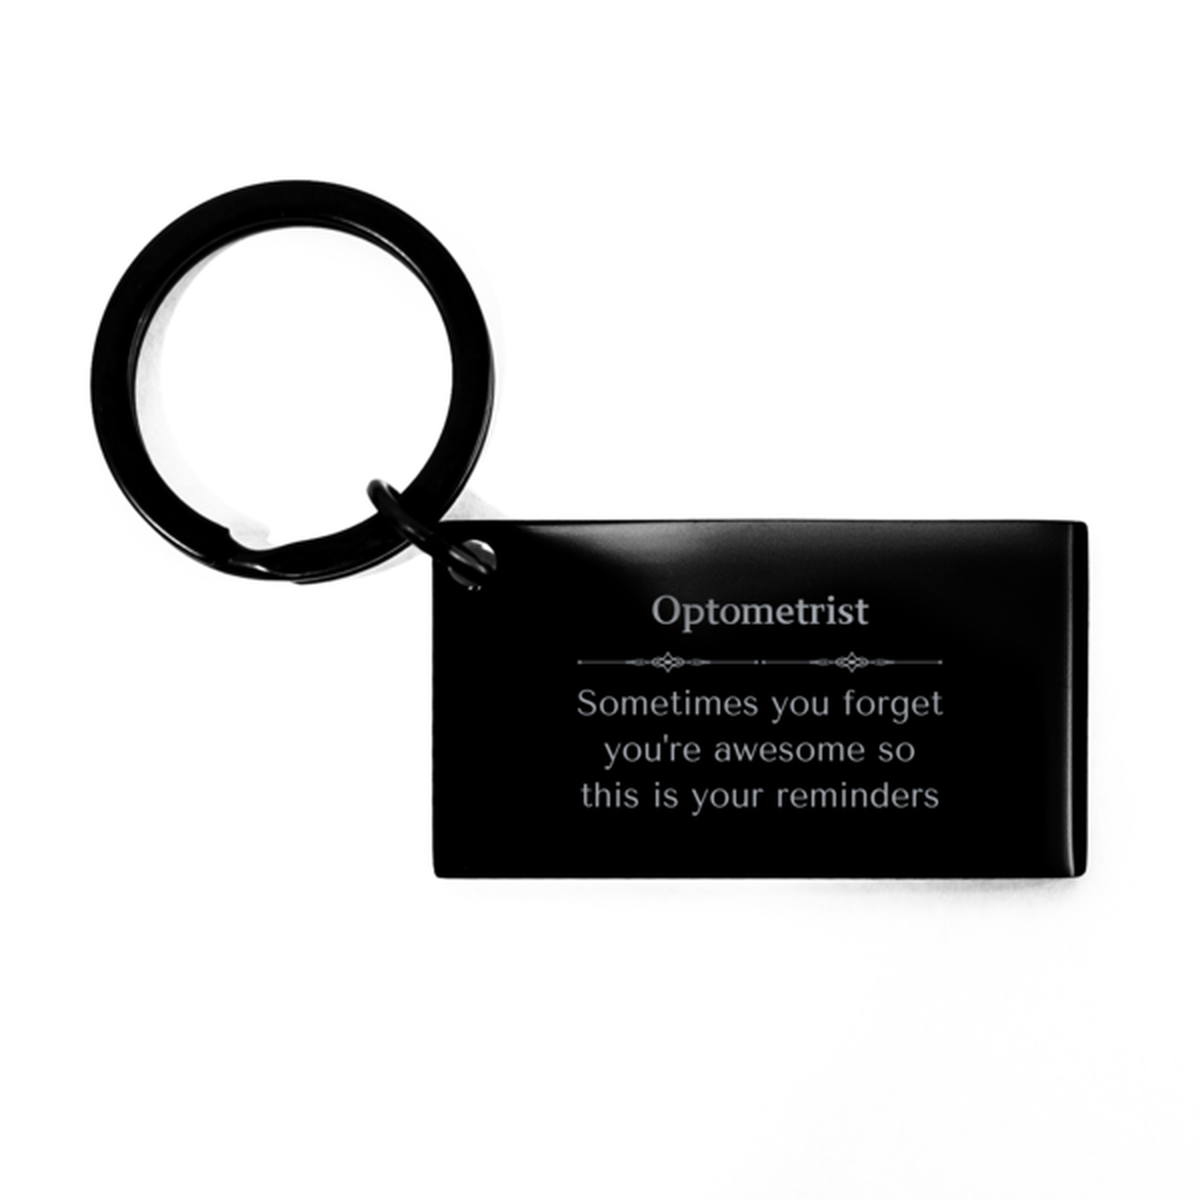 Sentimental Optometrist Keychain, Porter Sometimes you forget you're awesome so this is your reminders, Graduation Christmas Birthday Gifts for Optometrist, Men, Women, Coworkers